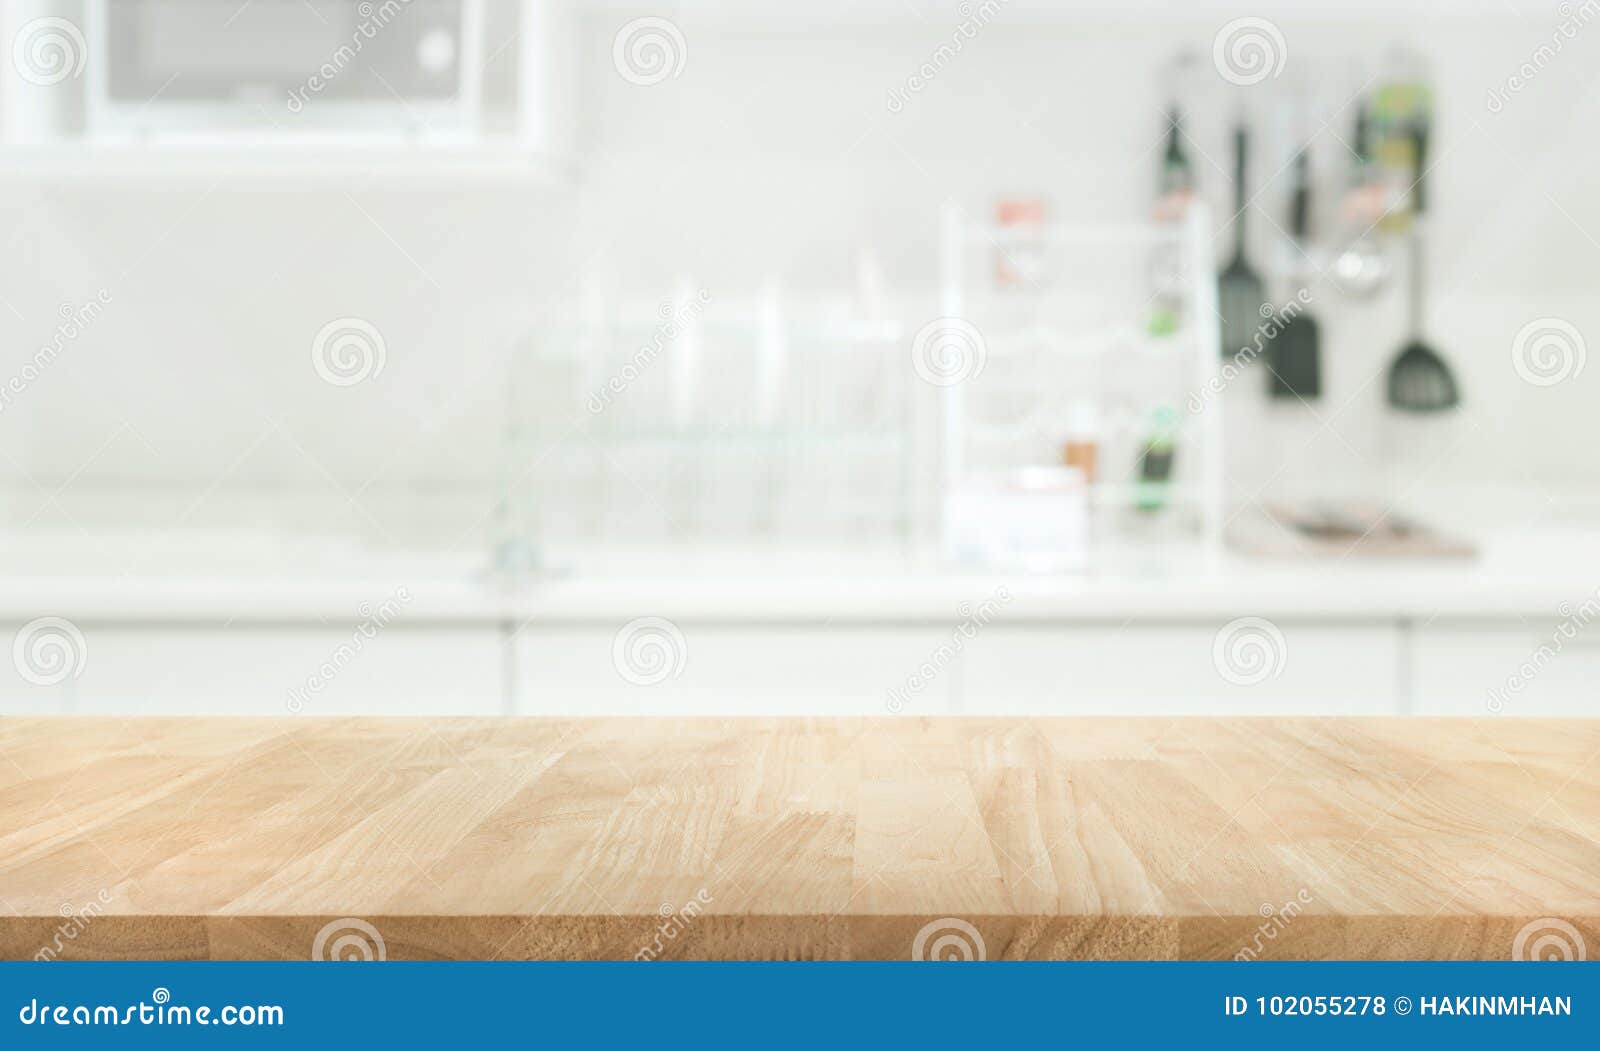 wood table top on blur kitchen room background